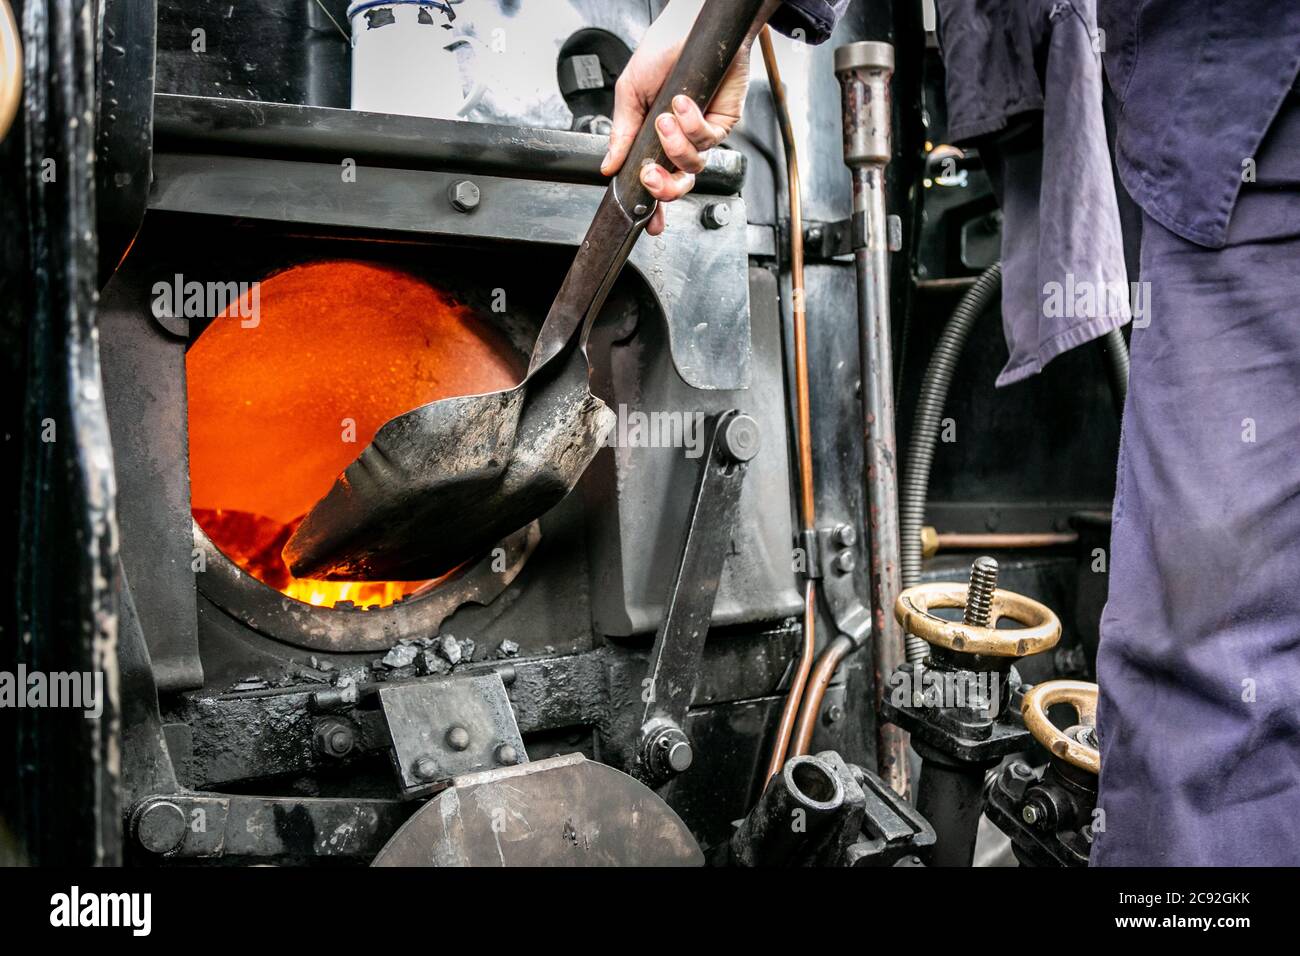 Train driver or fireman putting coal into a steam engine, UK Stock Photo